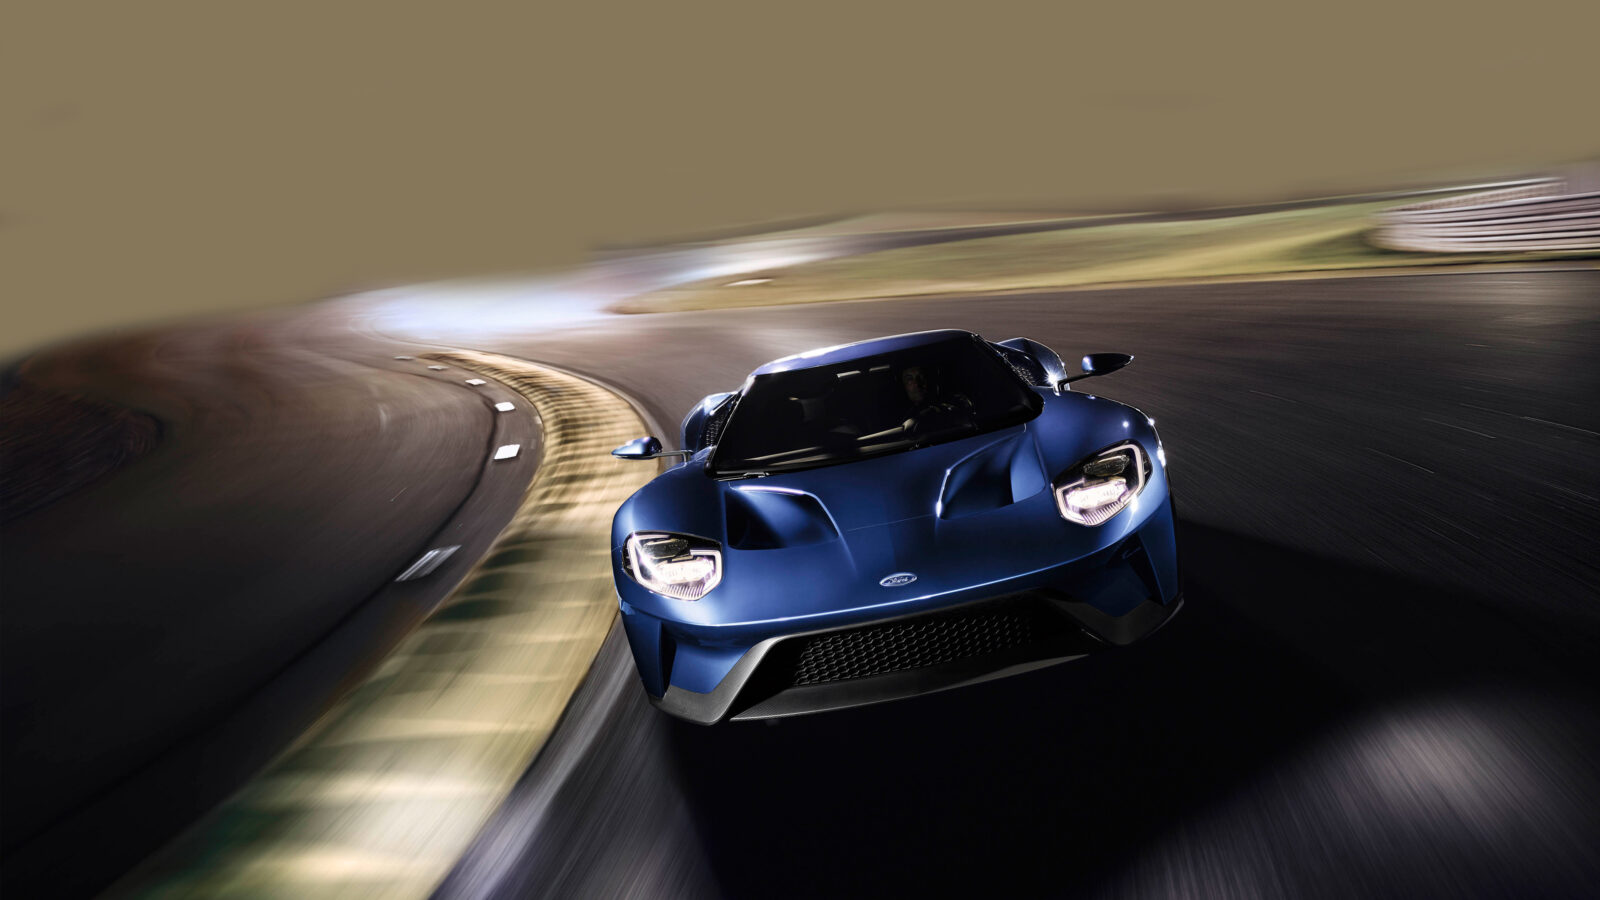 Download 4K Ford GT Car Pictures, Ford Wallpapers - 4k, Car, HD Car Wallpaper